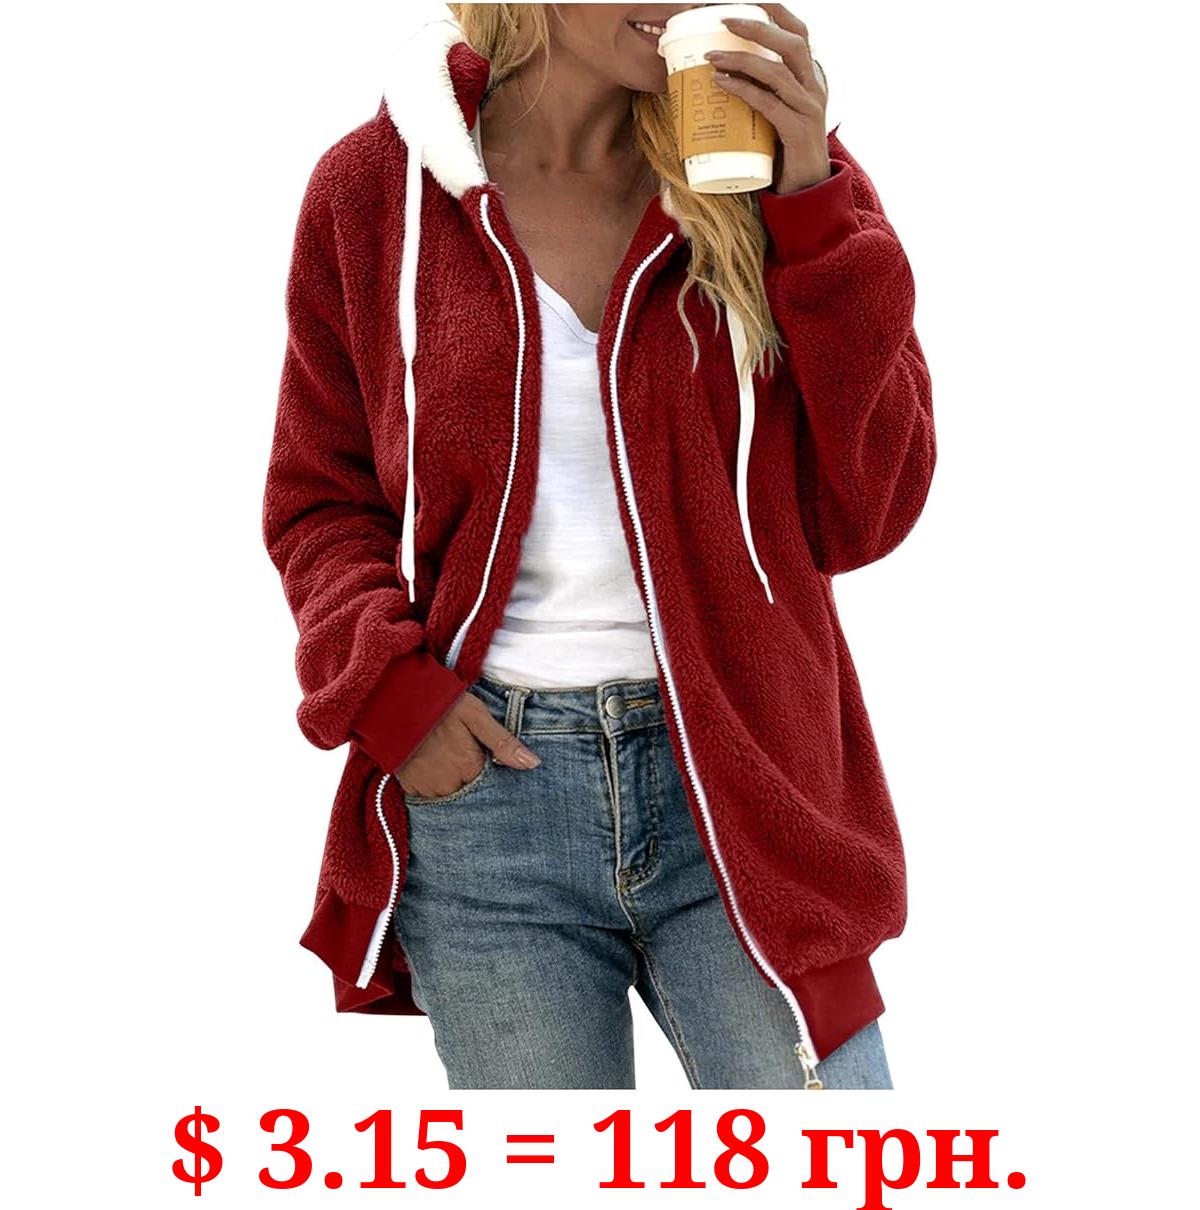 Ollysqiar Jackets for Women Loose Solid Color Artificial korean tops stuff for 3 dollars clearance womens swimsuits women robes clearance bulk clothing sweatshirtes sale